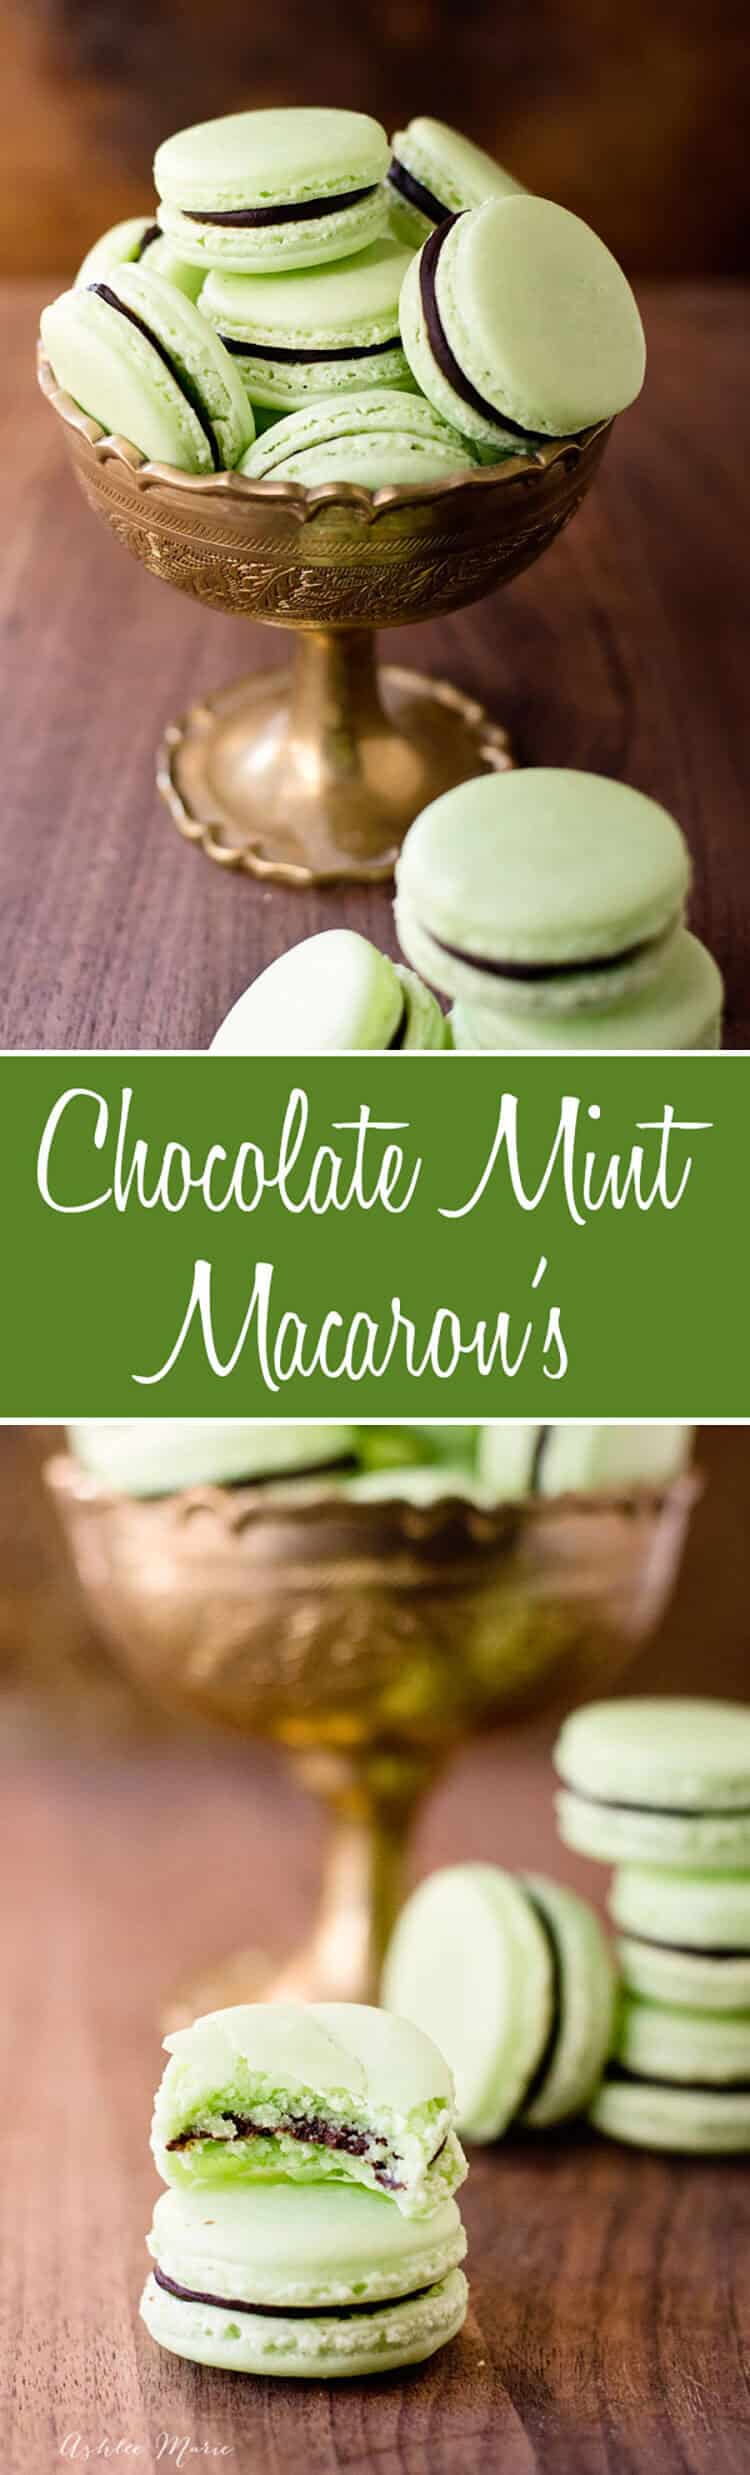 a recipe and tutorial for making your own peppermint and ganache macarons. This was my first attempt but it wont be the last.